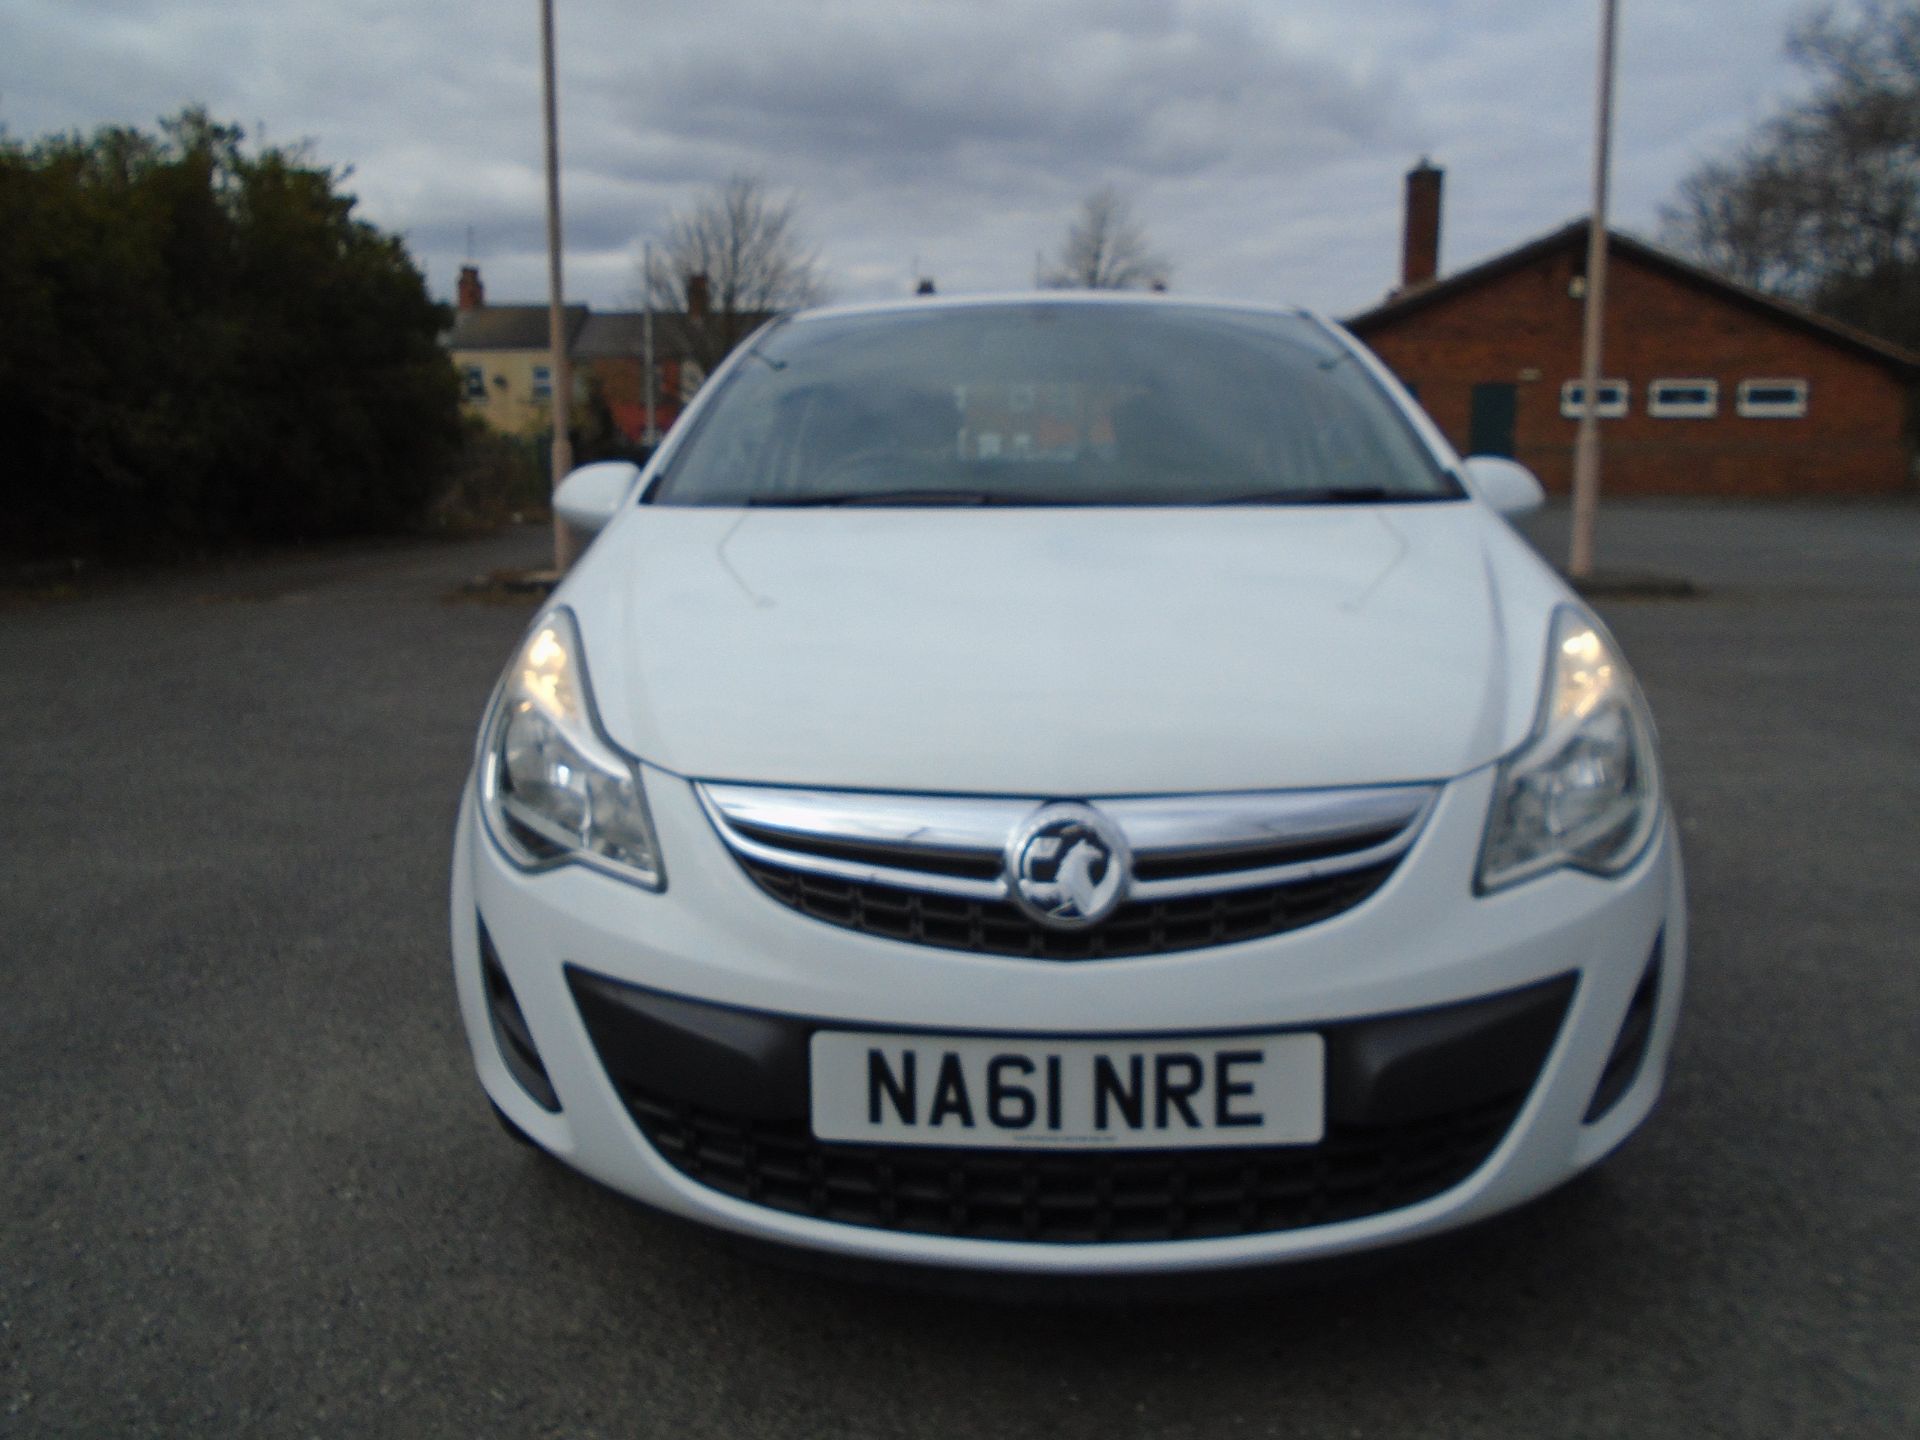 2011/61 REG VAUXHALL CORSA S ECOFLEX 998CC PETROL WHITE 3DR HATCHBACK, SHOWING 3 FORMER KEEPERS - Image 2 of 8